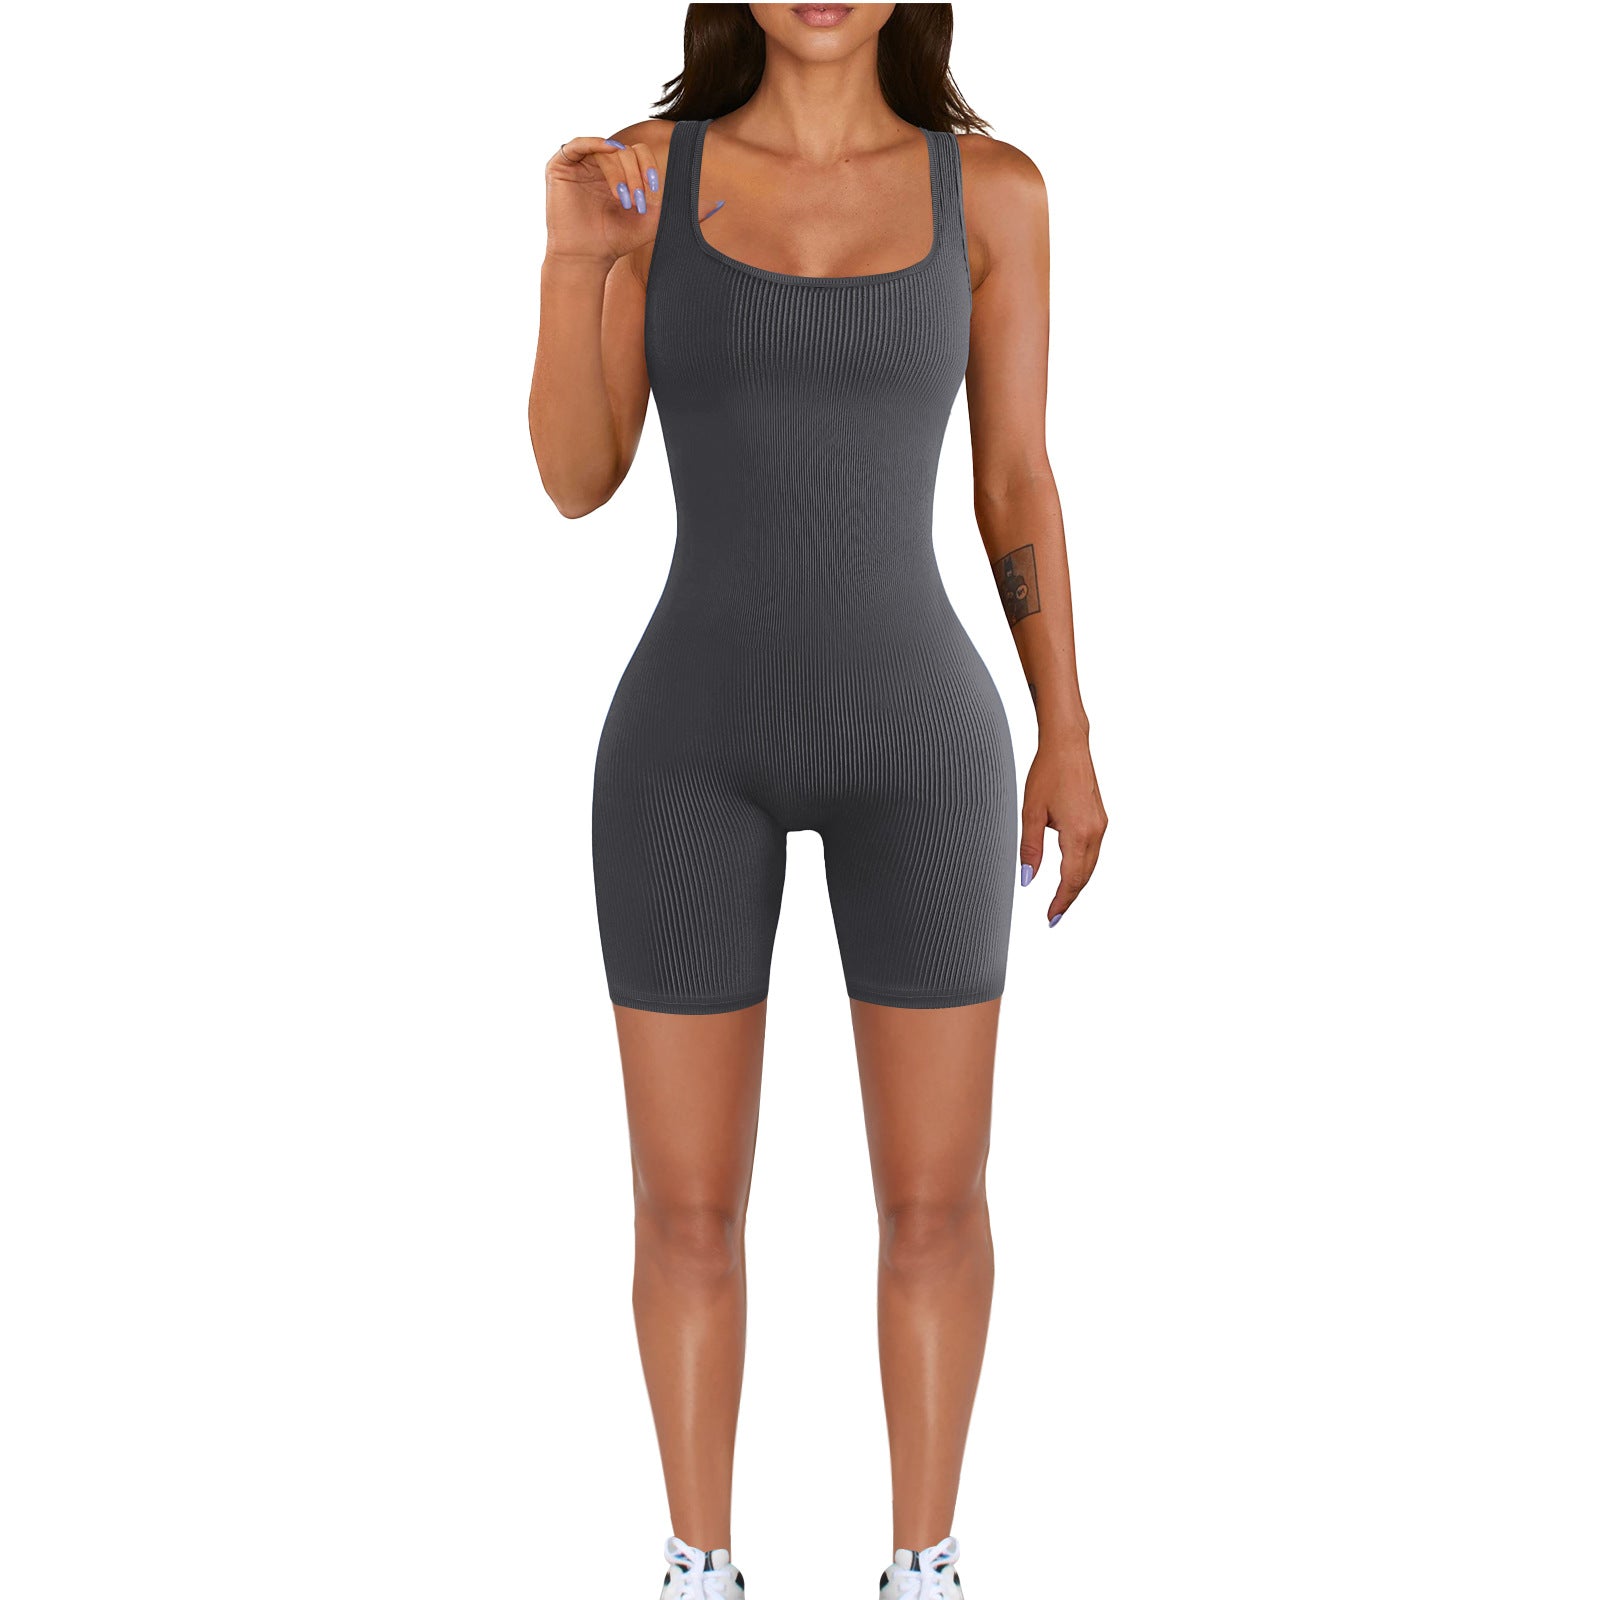 Women's New Attractive Fashion Wear Tight Jumpsuits